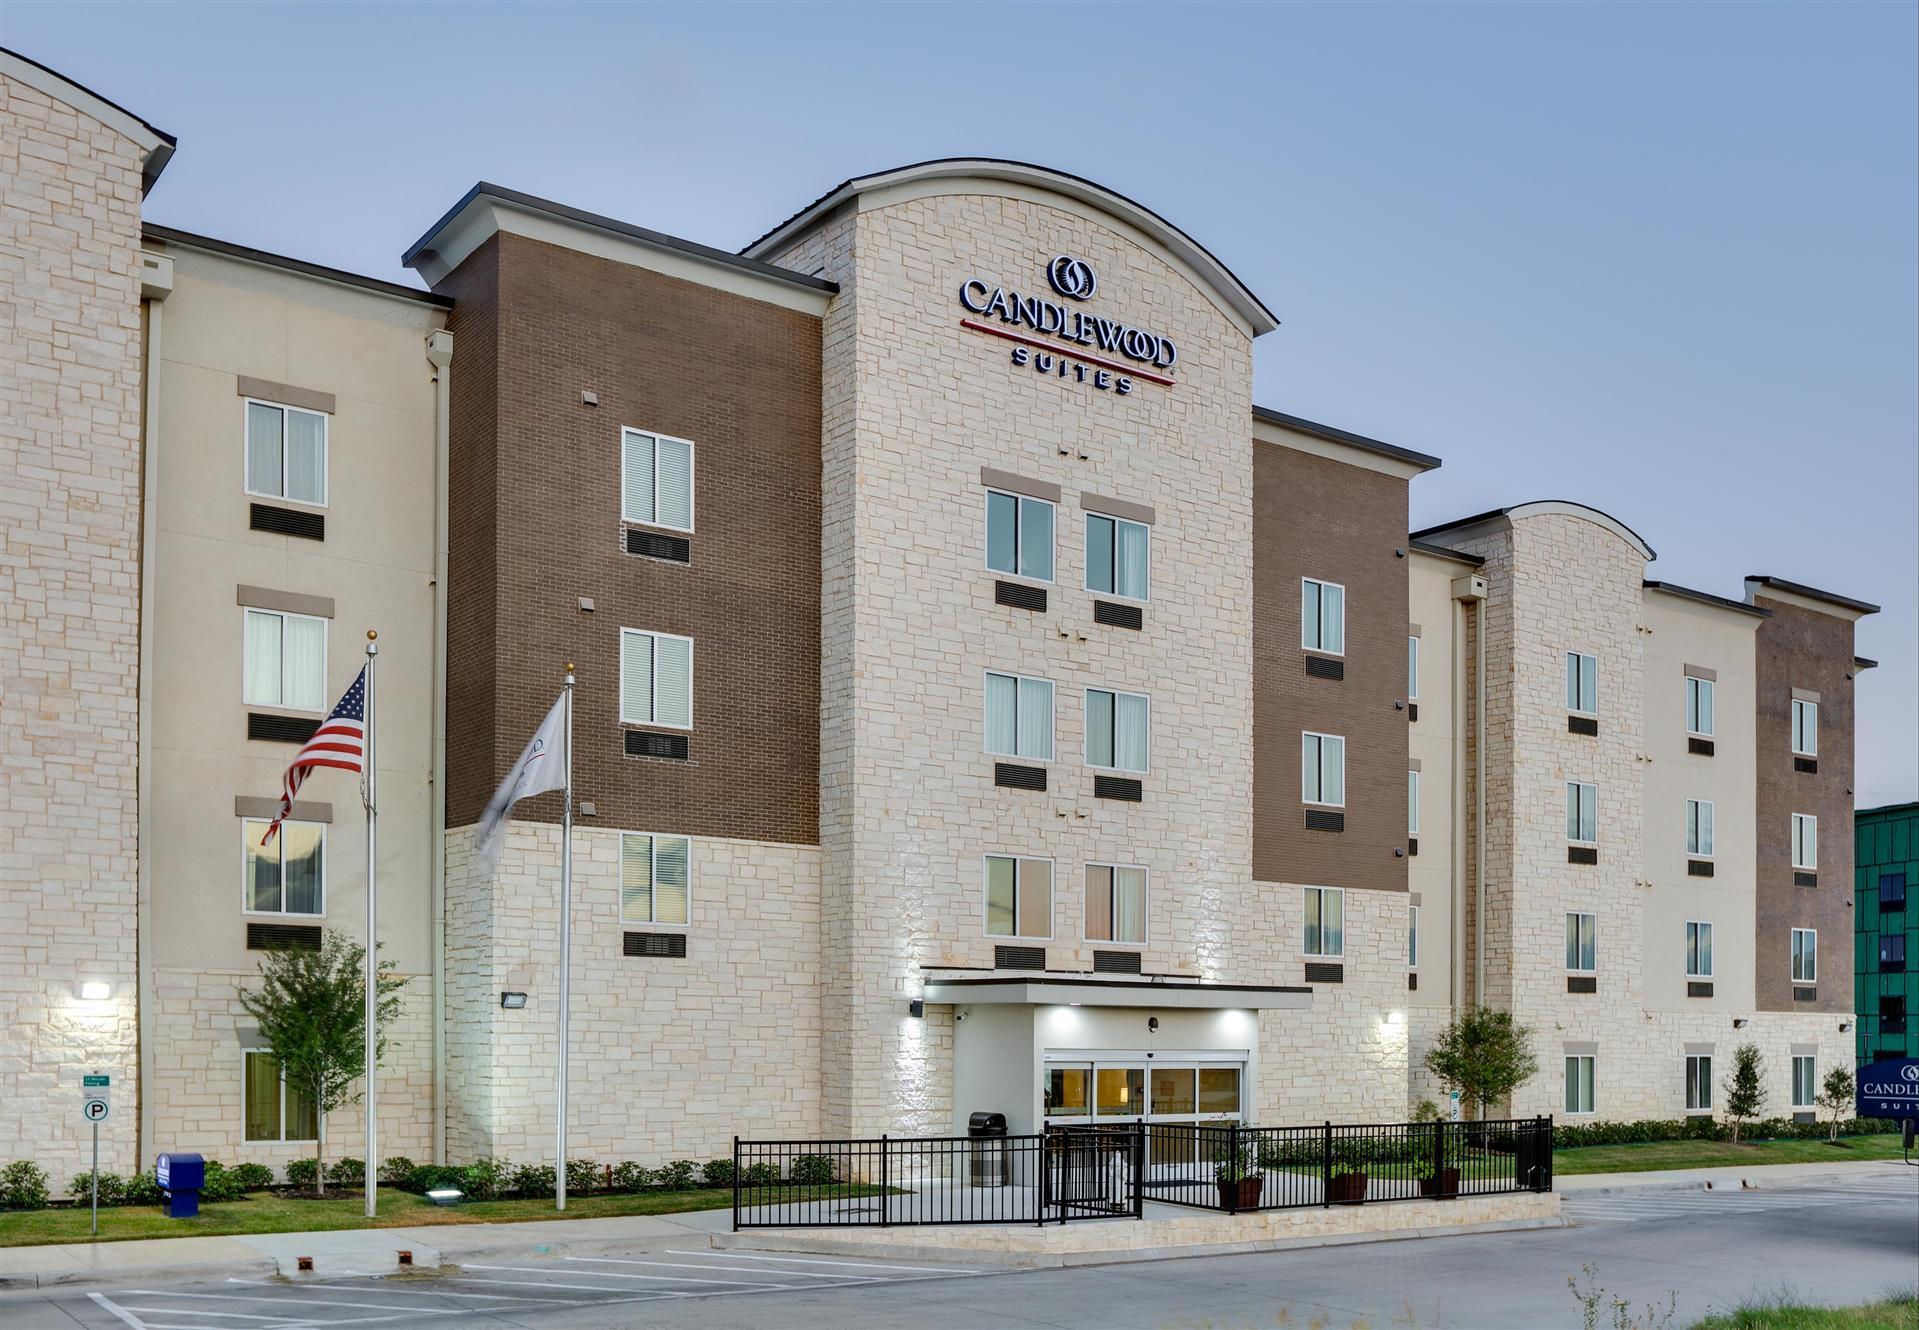 Candlewood Suites Farmers Branch in Farmers Branch, TX